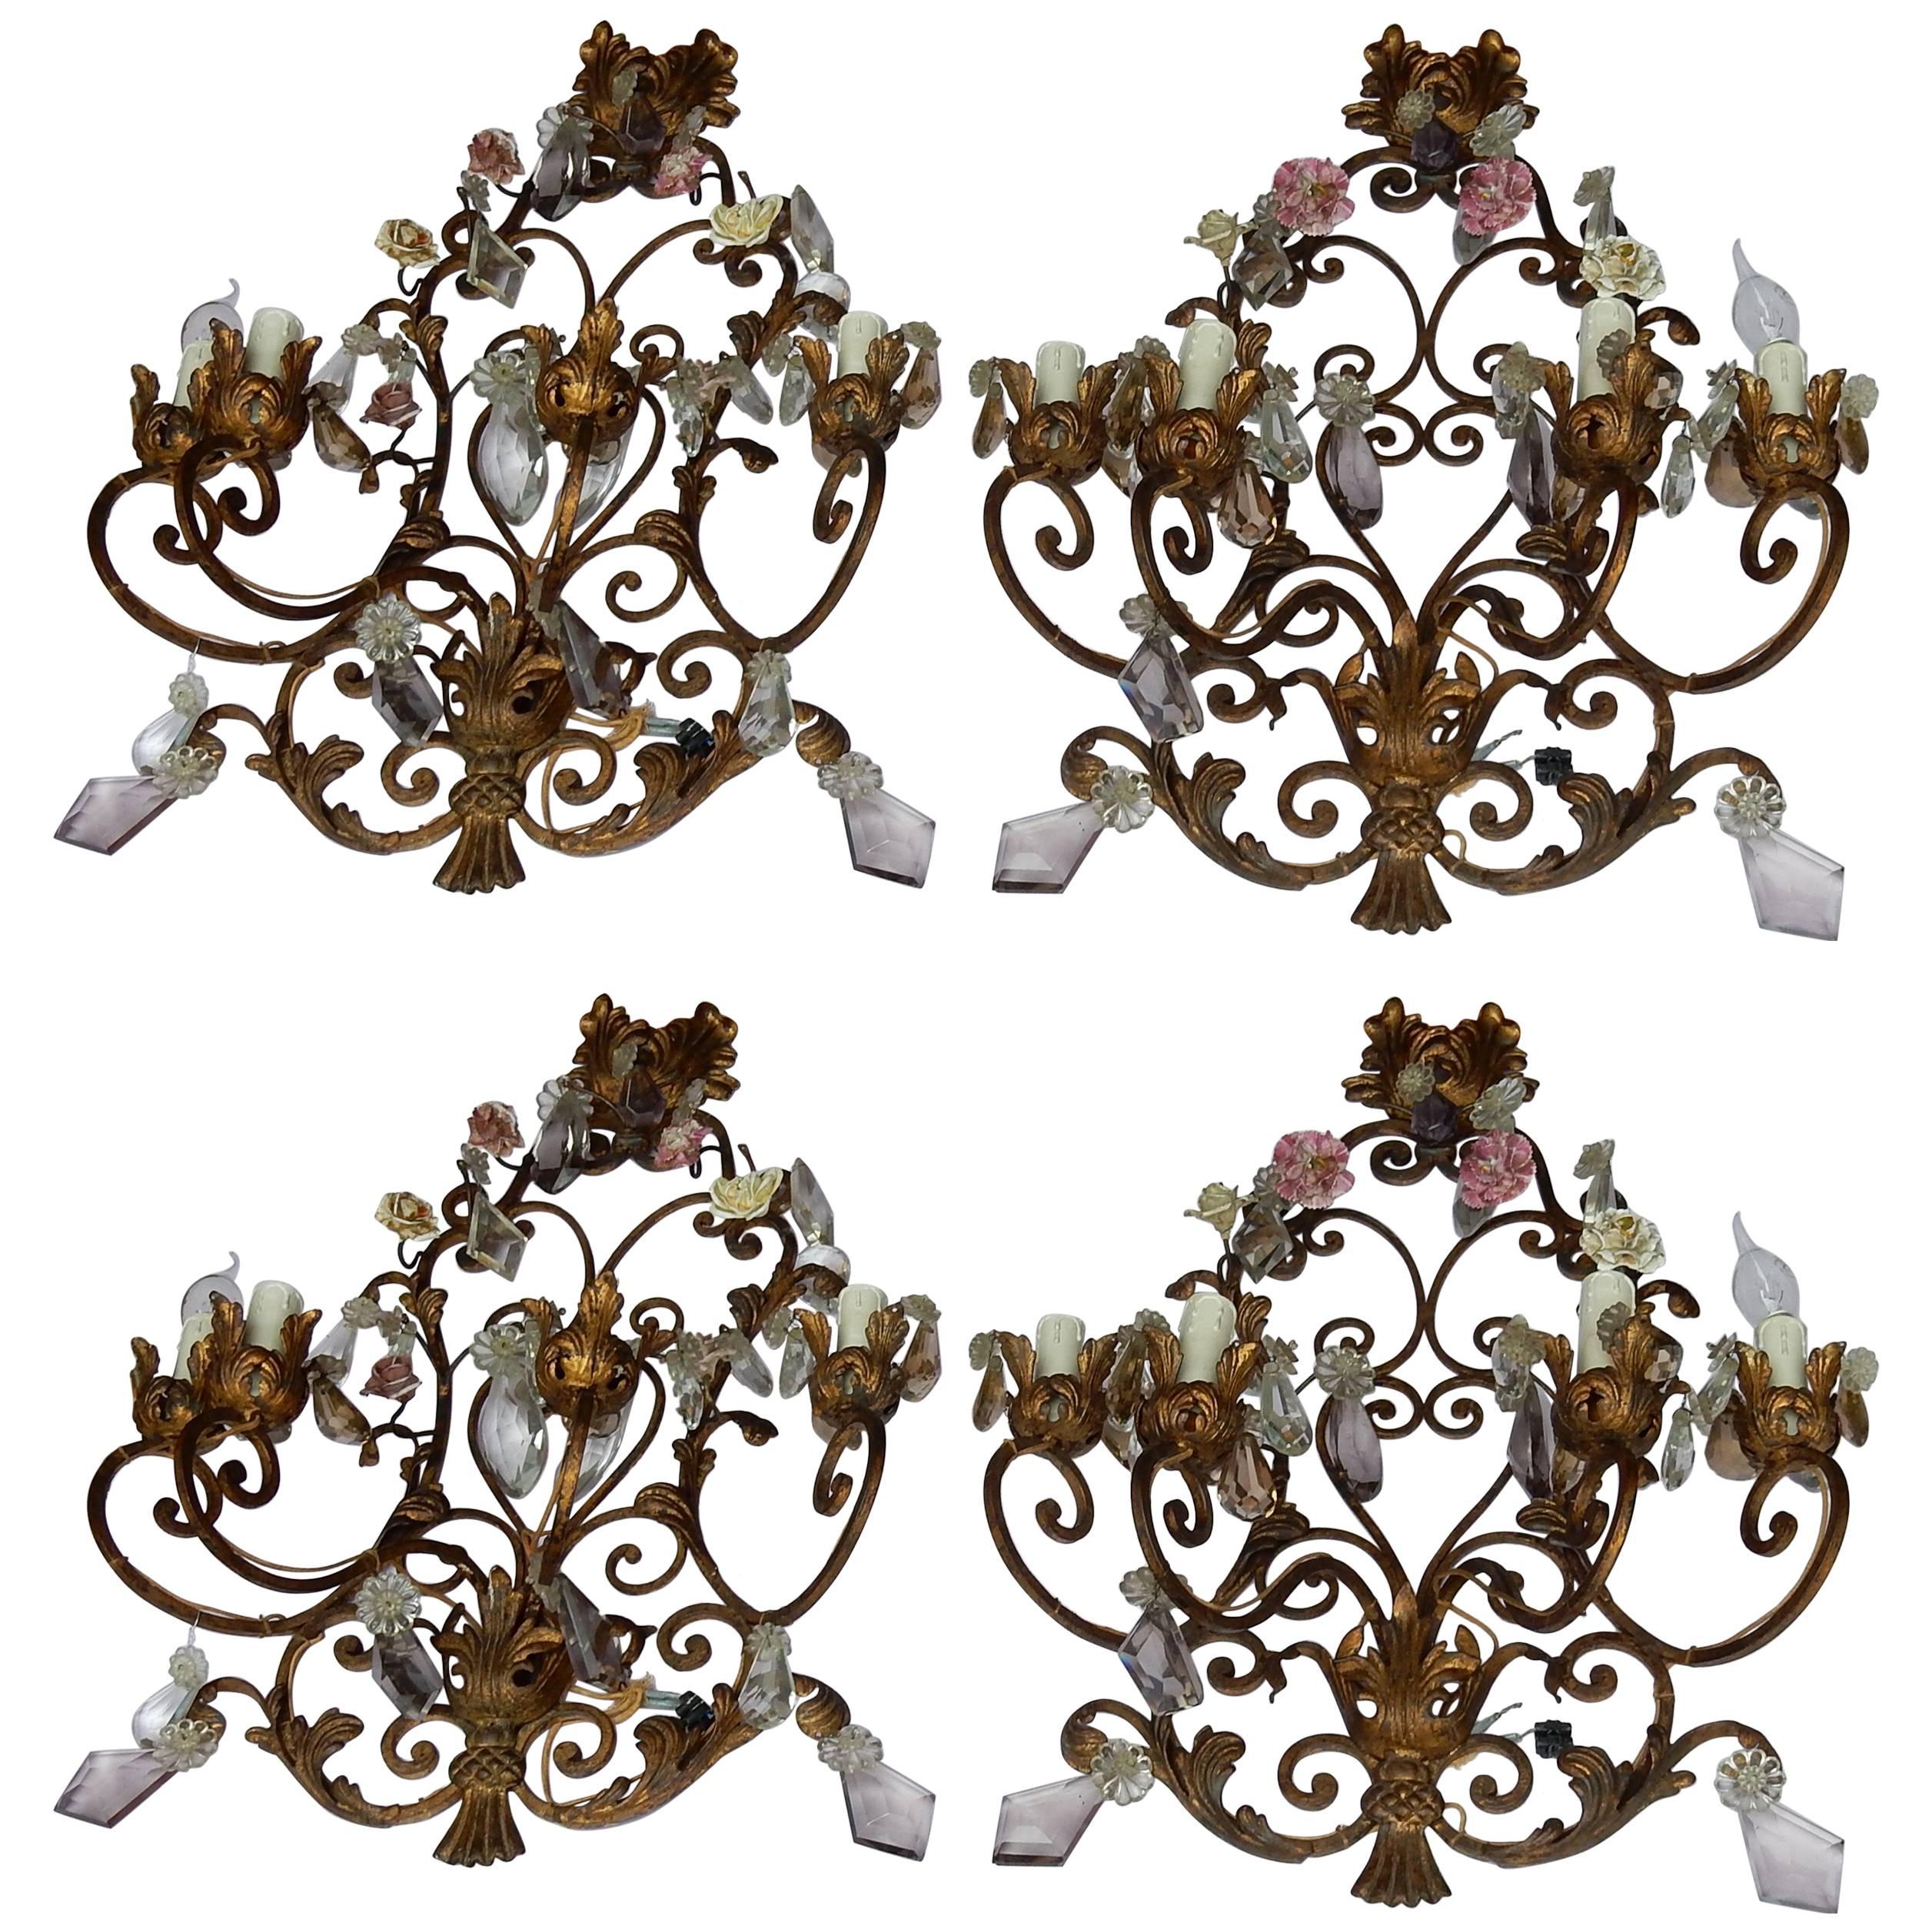 1900 Series of Four Wall Lamps Has Four Arms of Light N3 with Ceramic Flowers